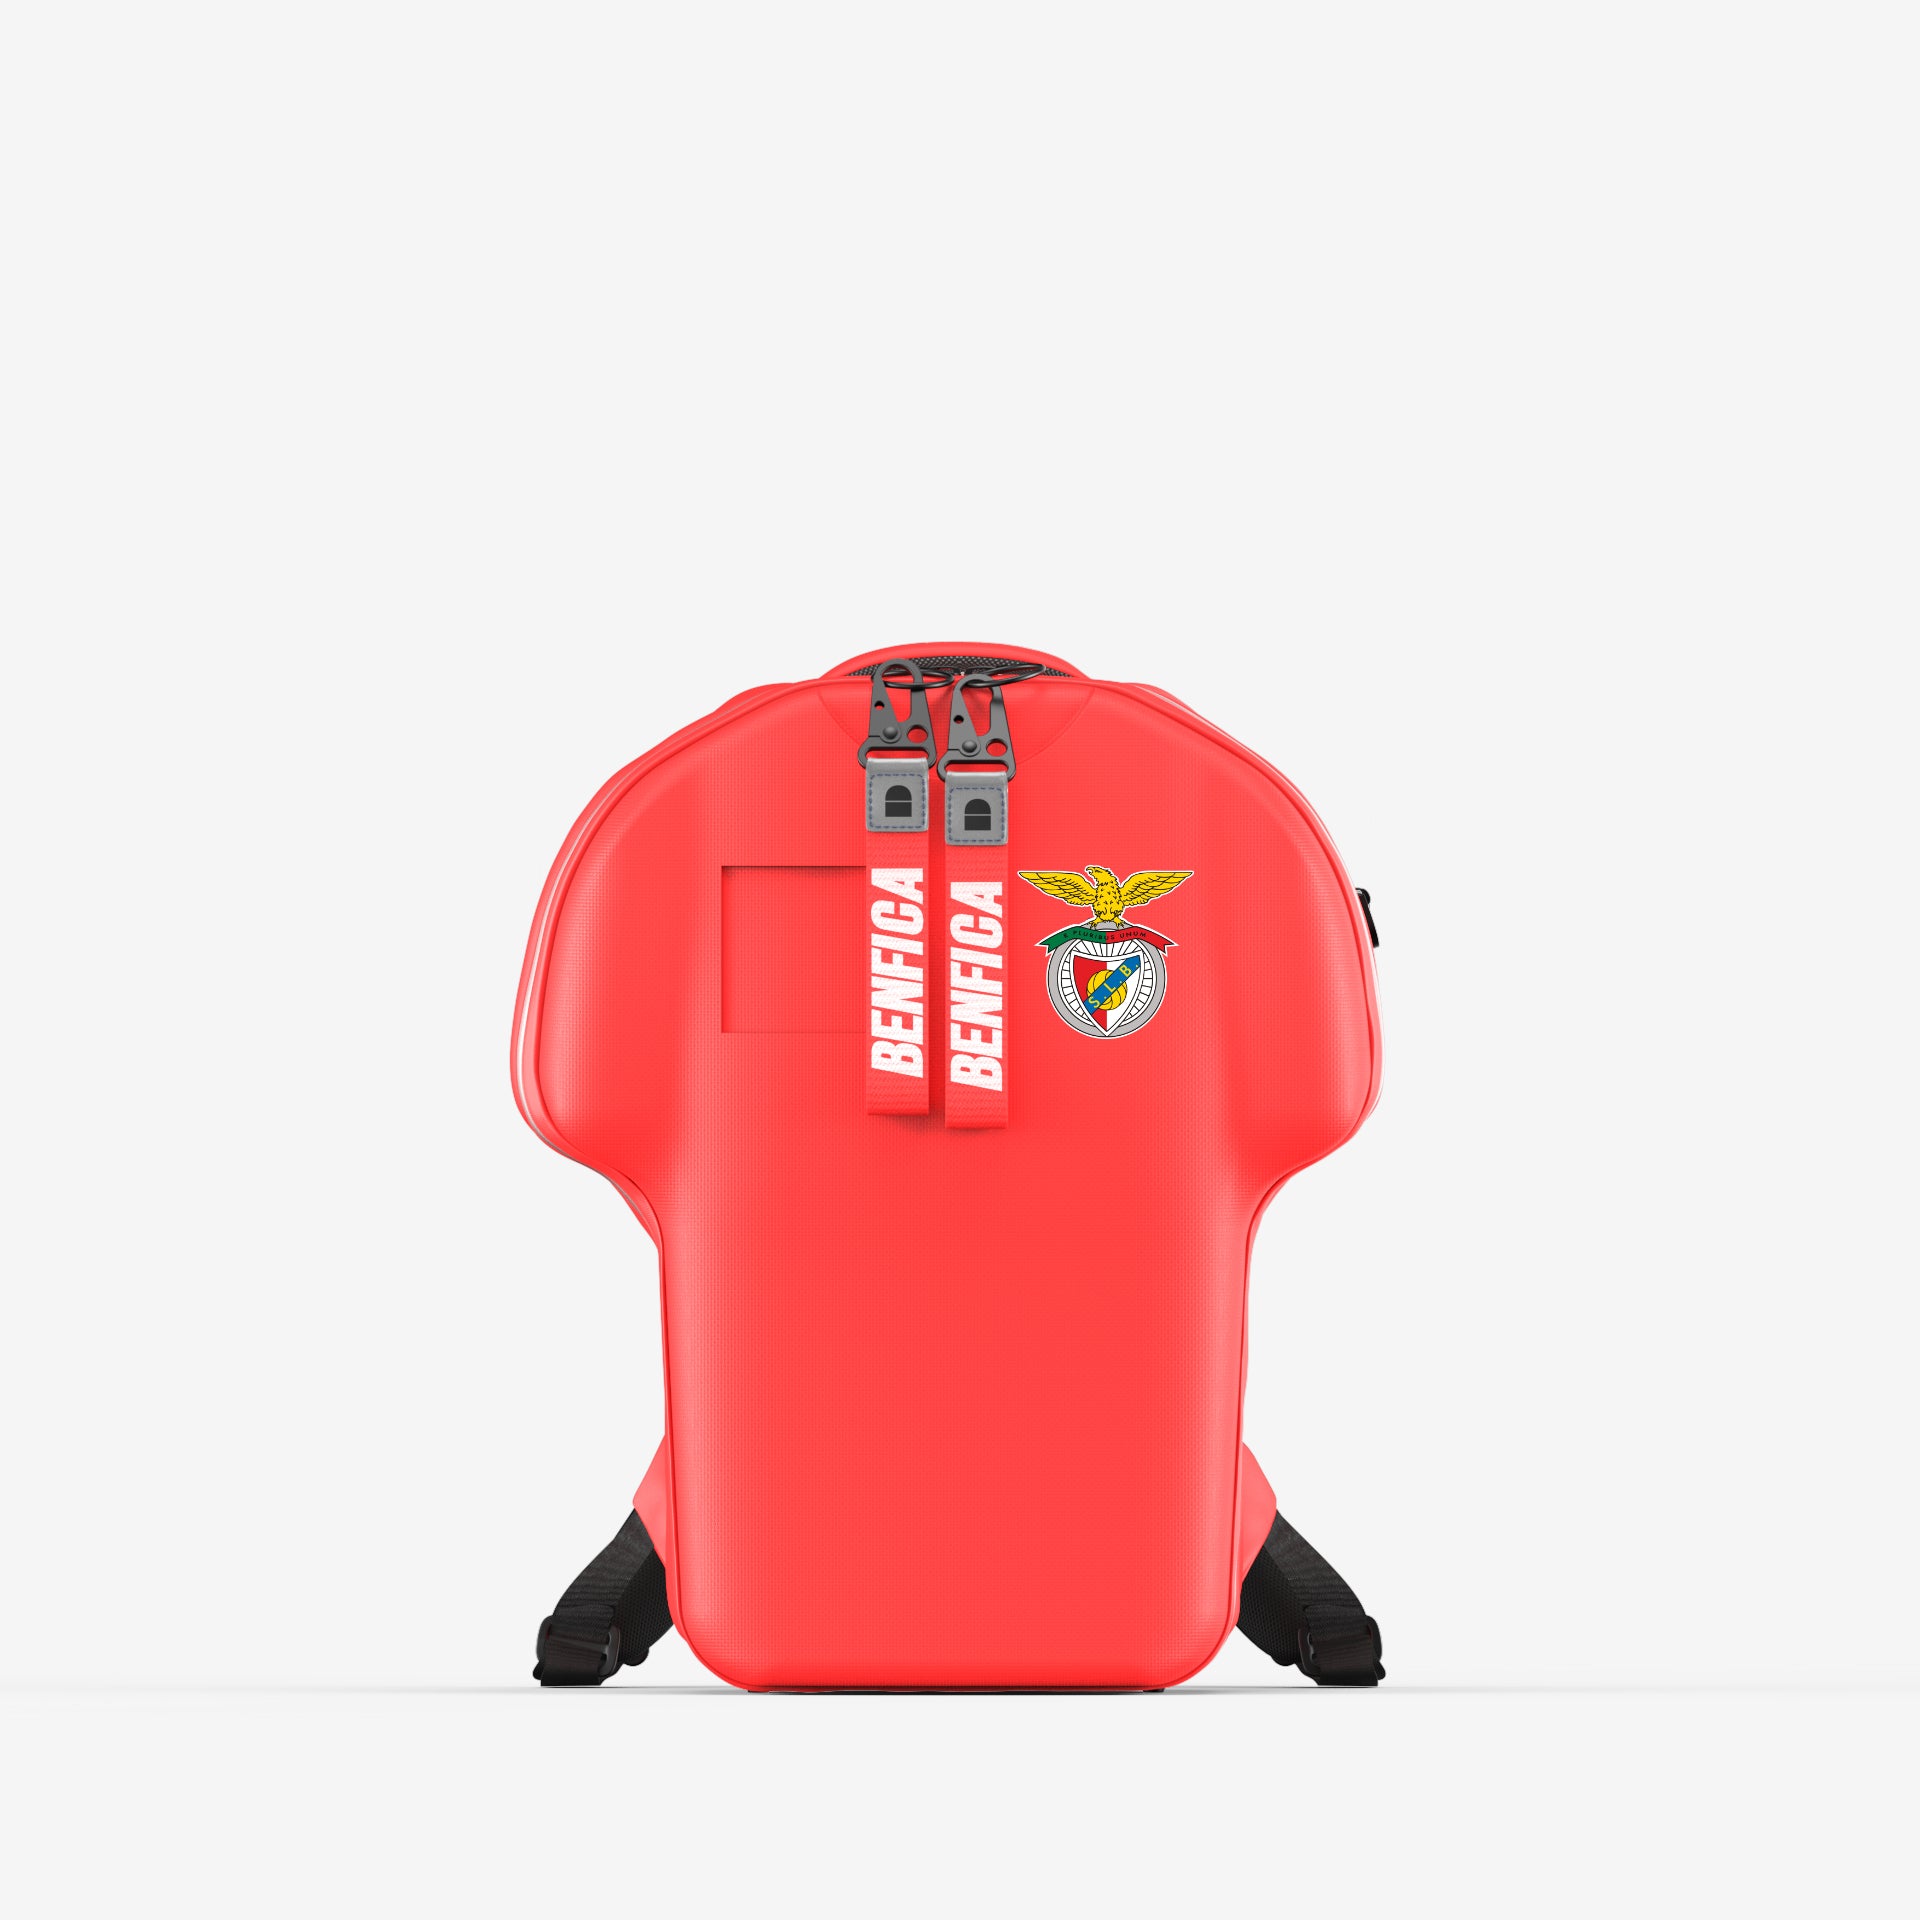 Benfica backpack size small